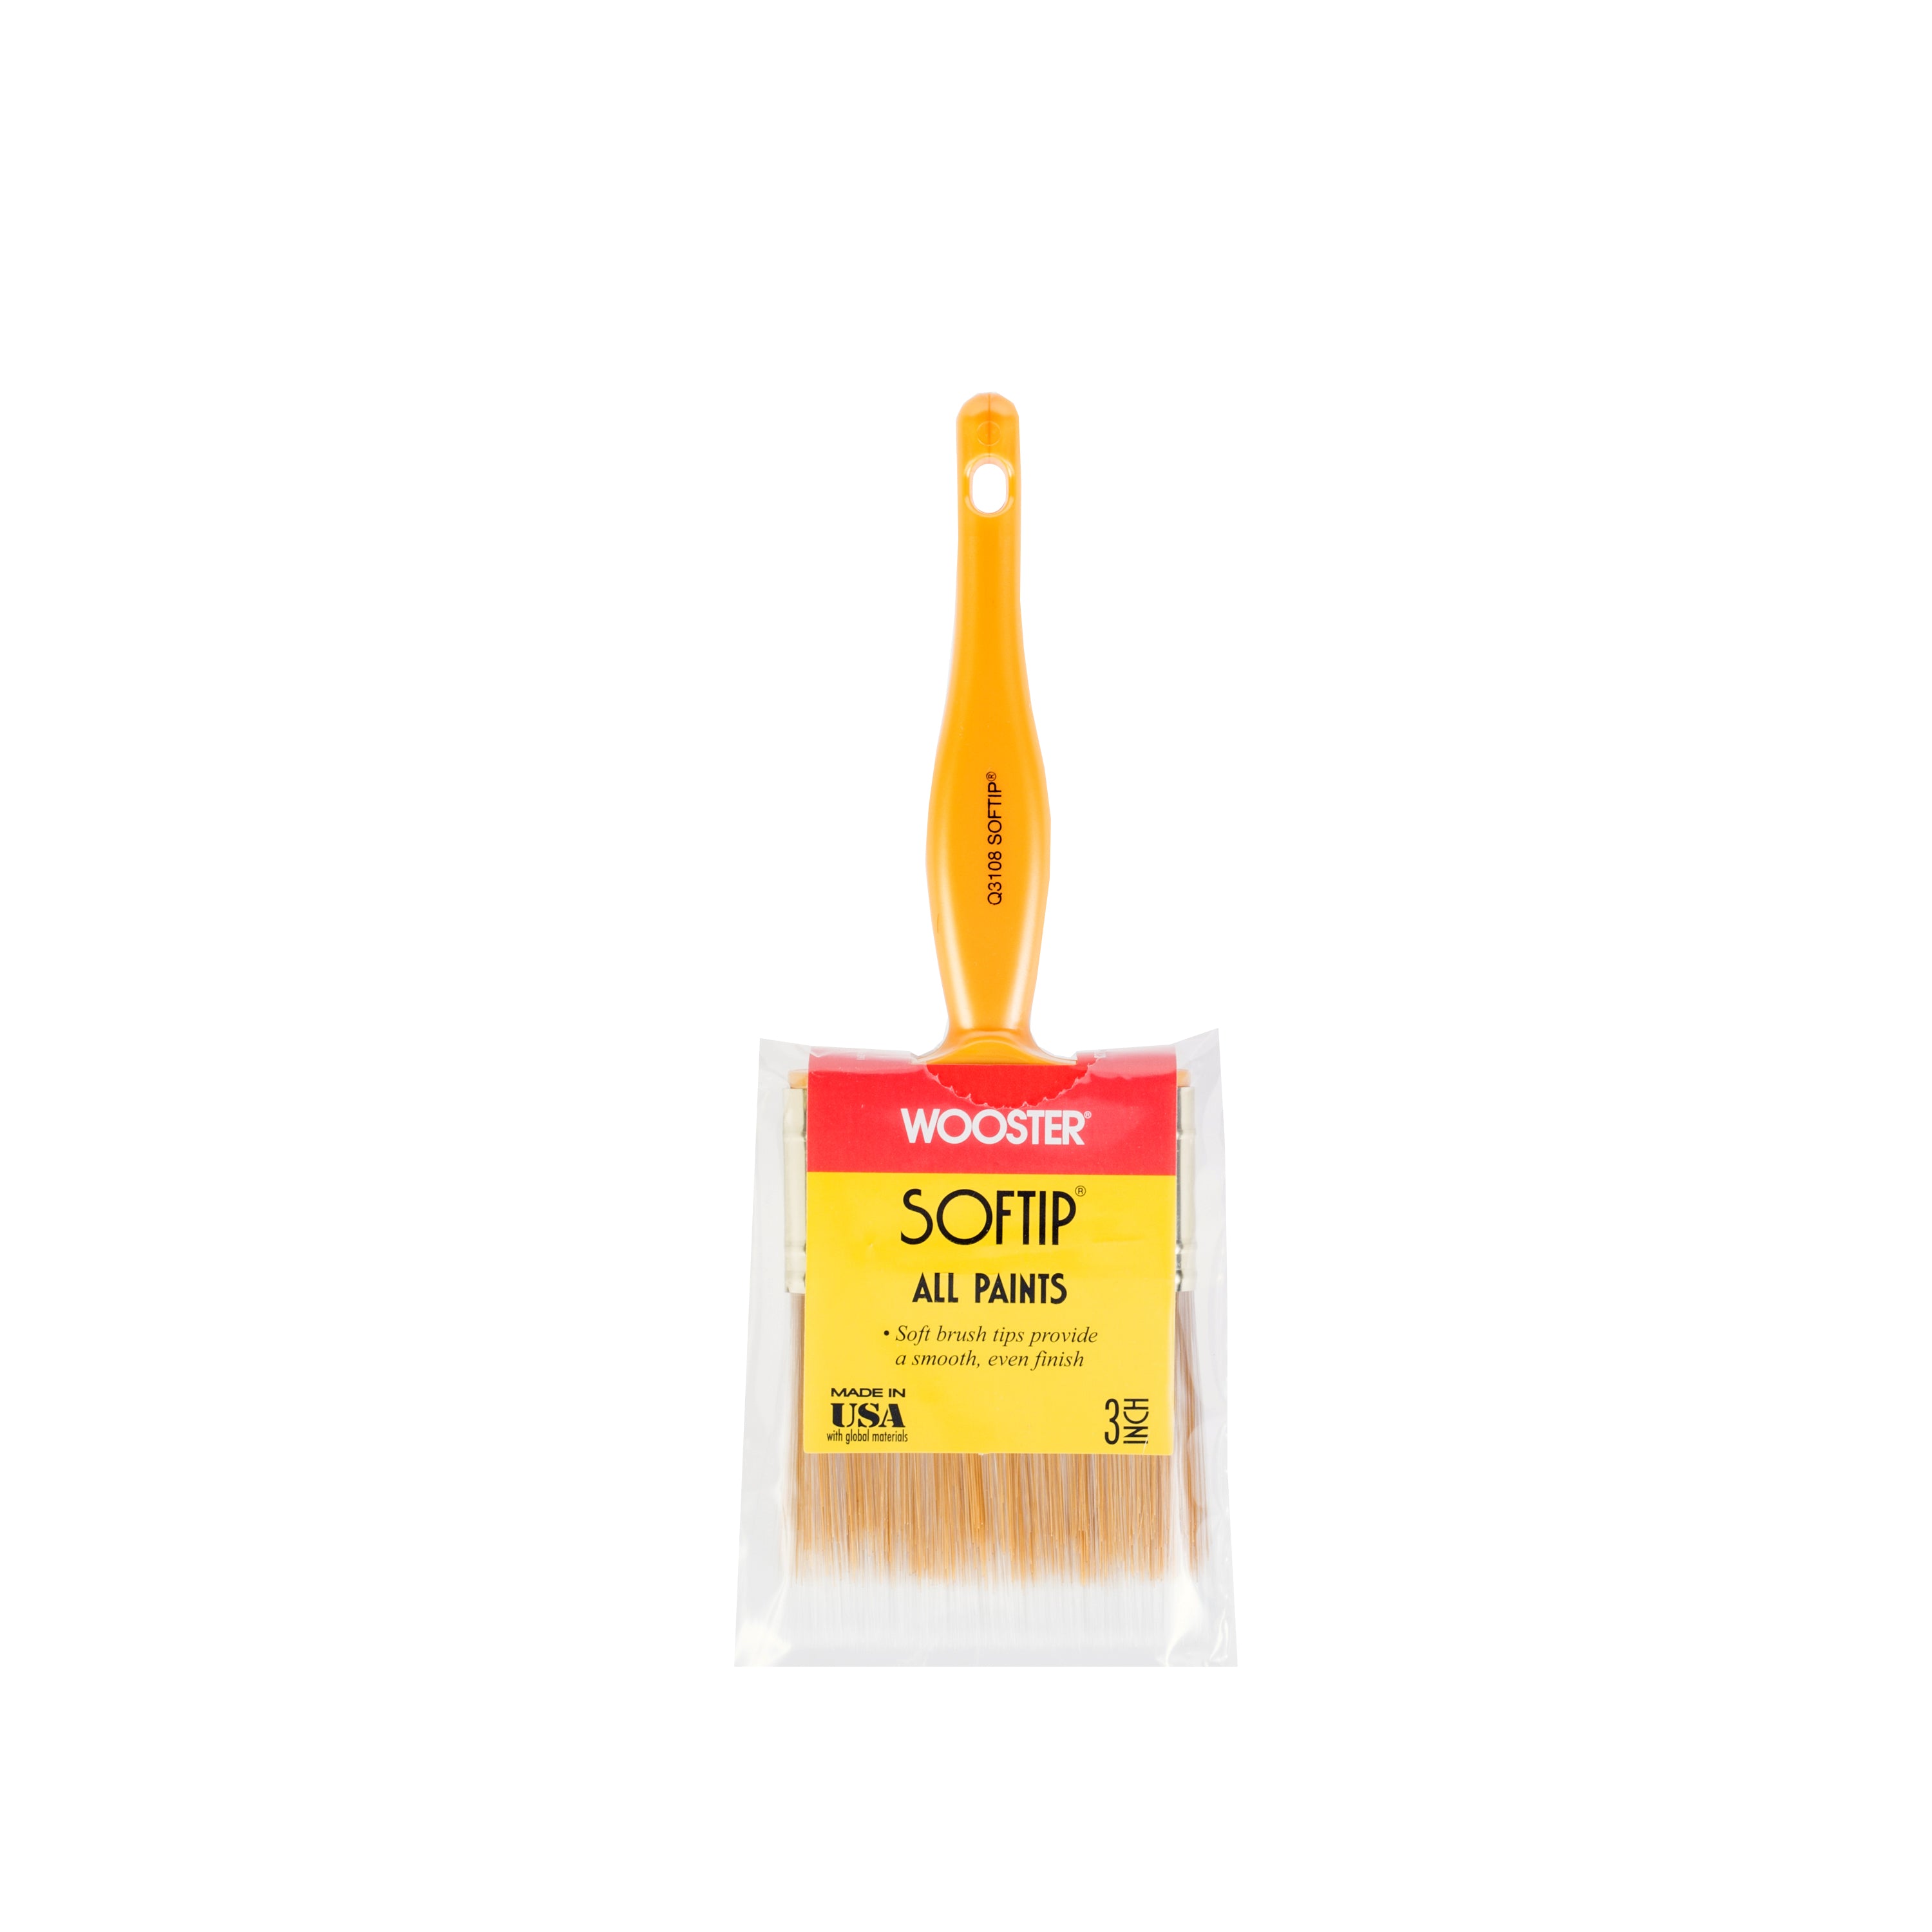 Wooster Softip Flat Sash Paint Brushes